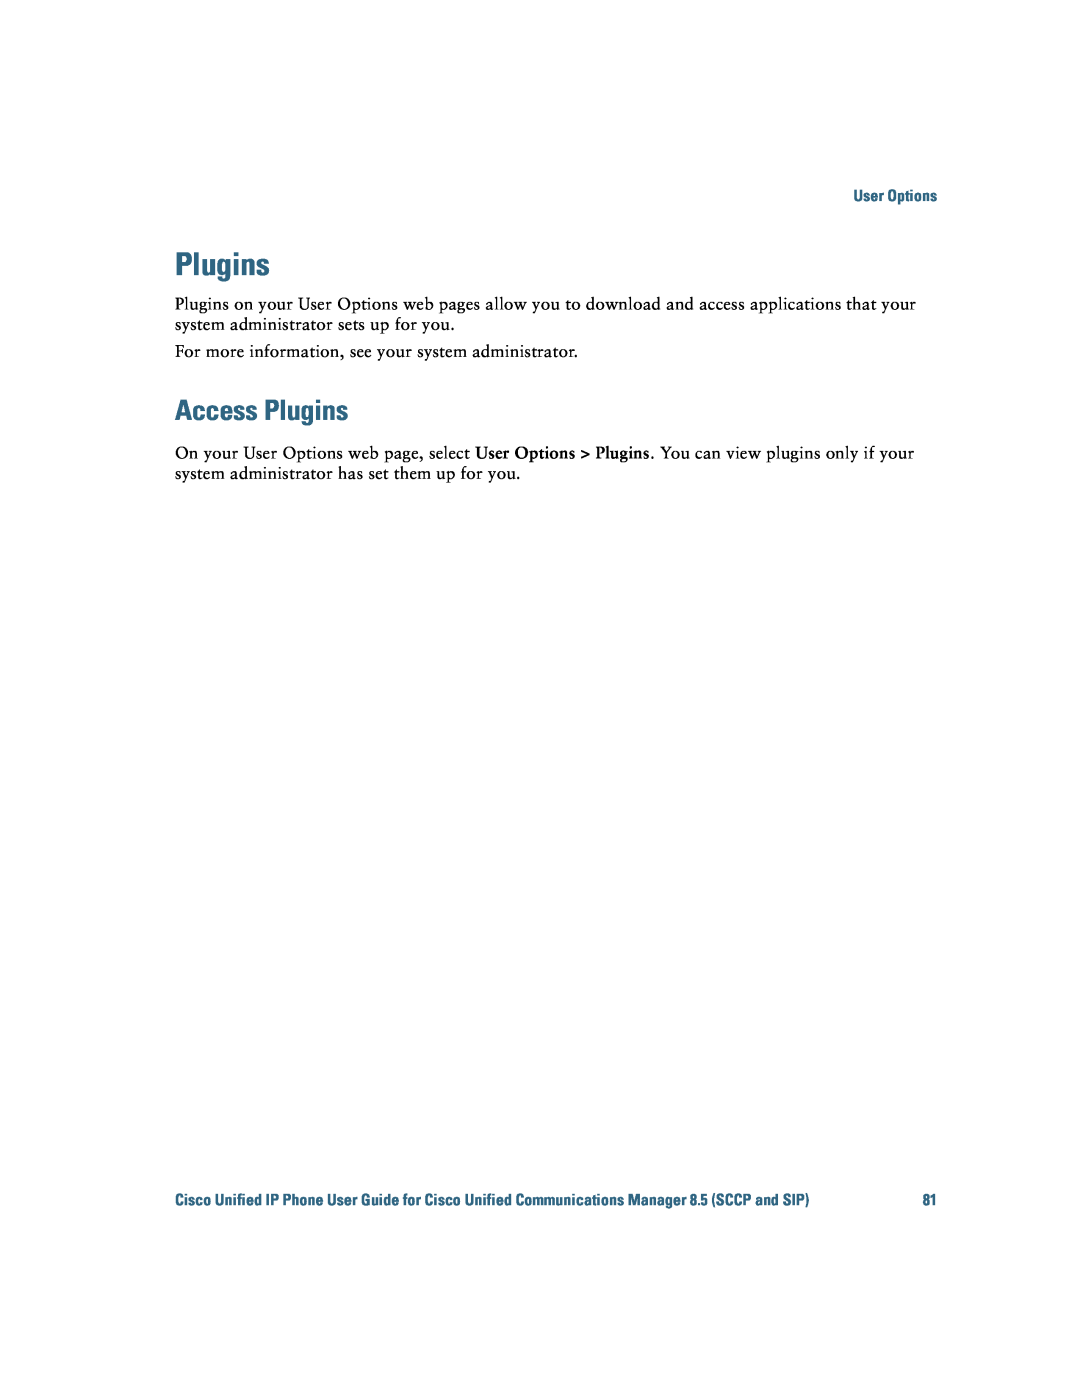 Cisco Systems IP Phone 8941 and 8945 manual Access Plugins 